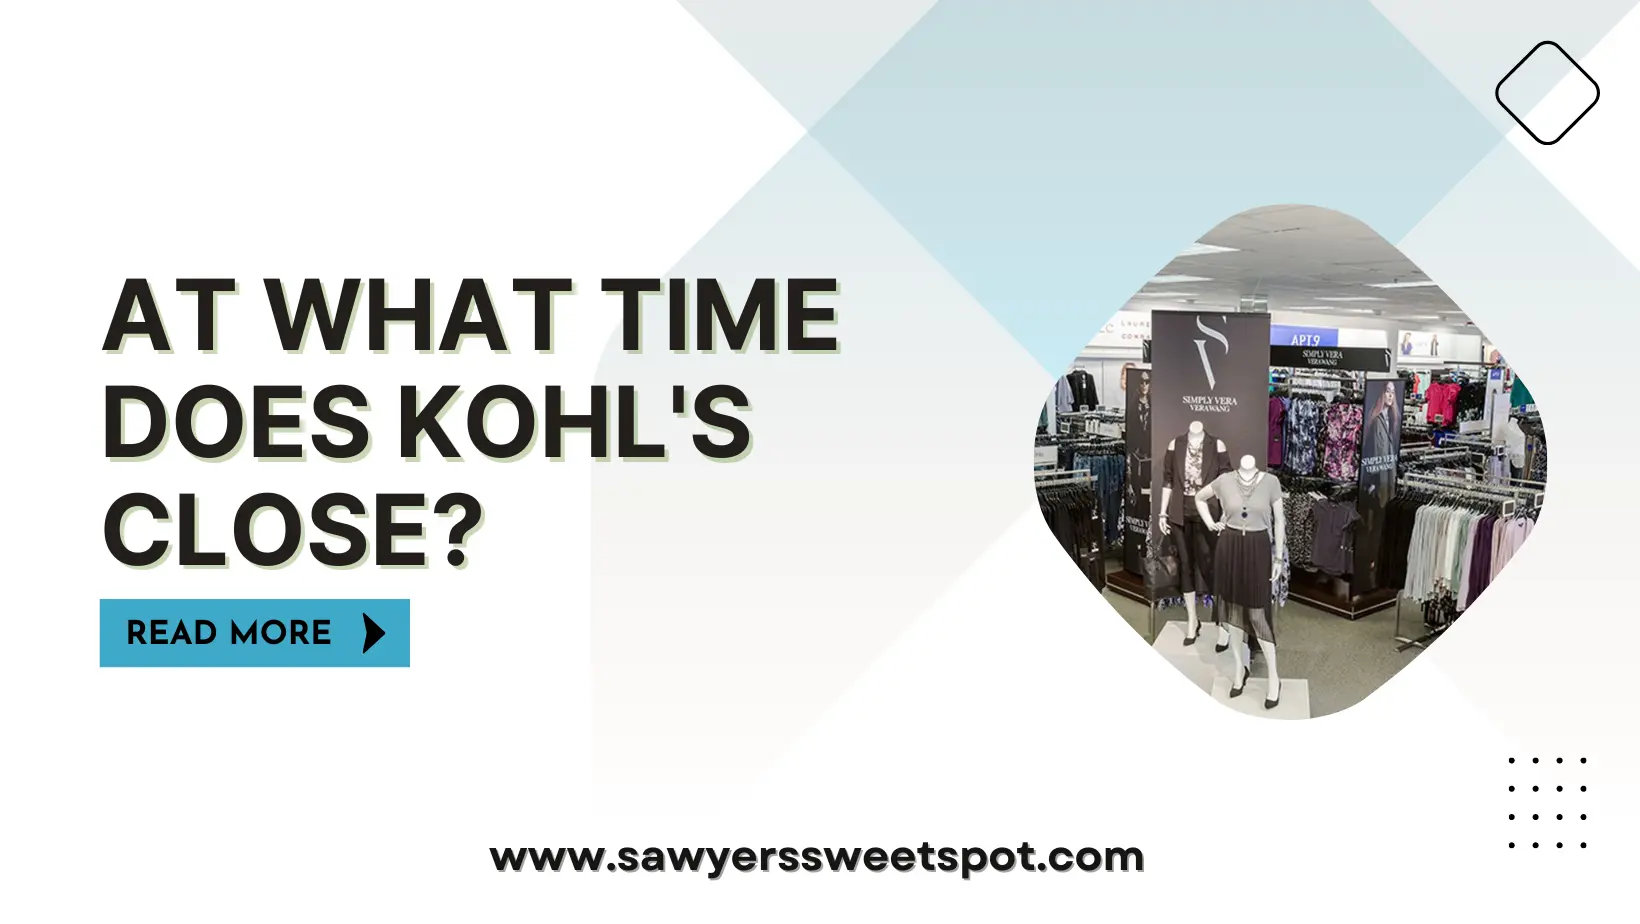 At What Time Does Kohl's Close?